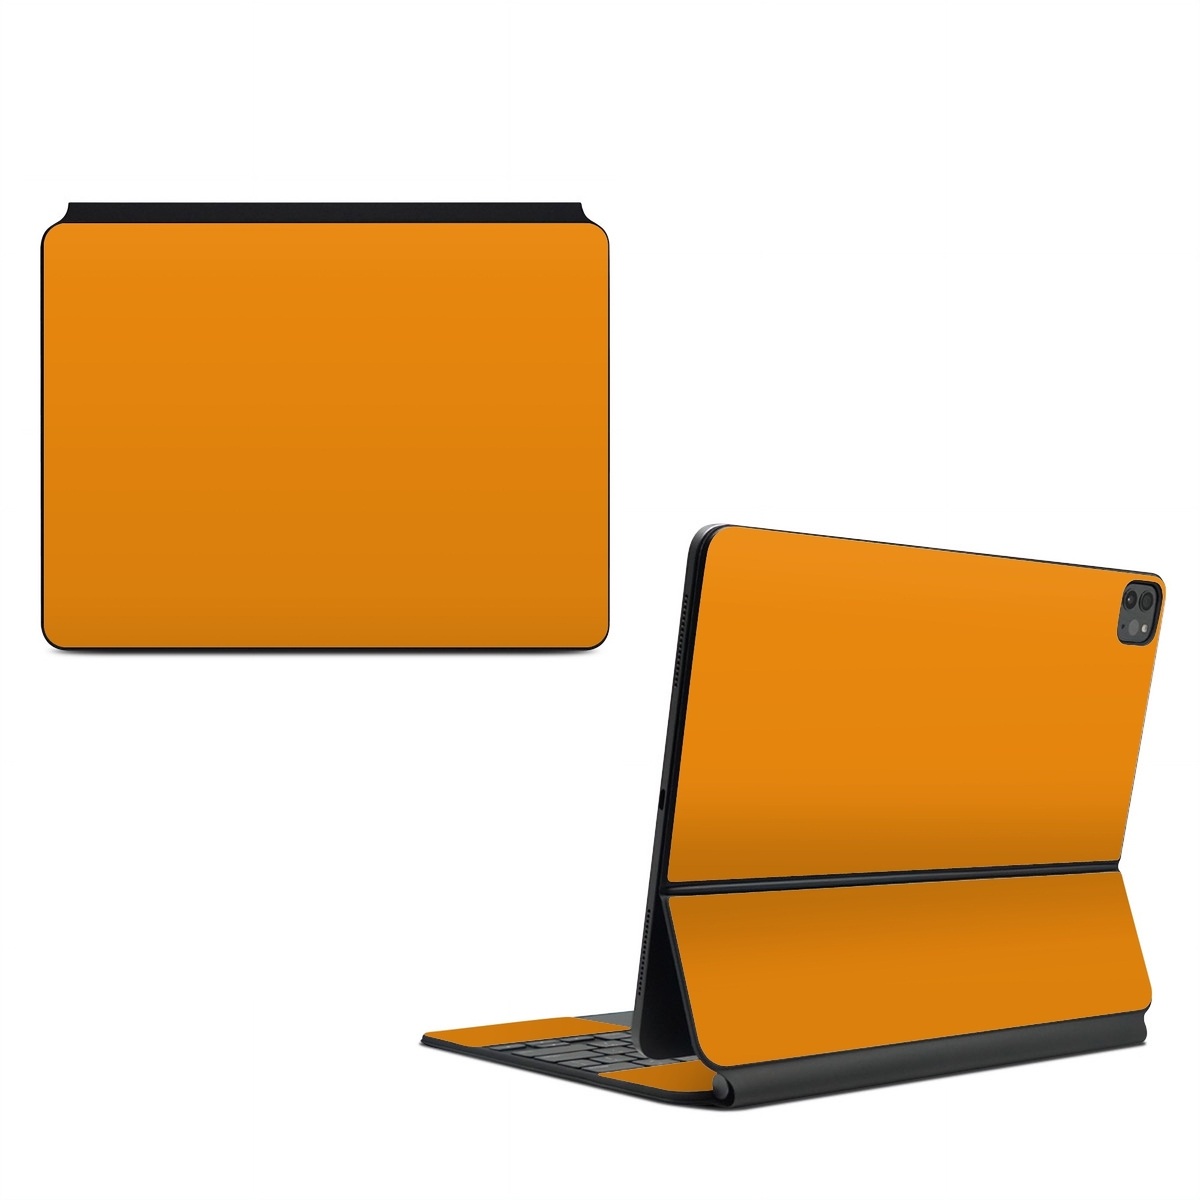 Magic Keyboard for iPad Series Skin design of Orange, Yellow, Brown, Text, Amber, Font, Peach, with orange colors